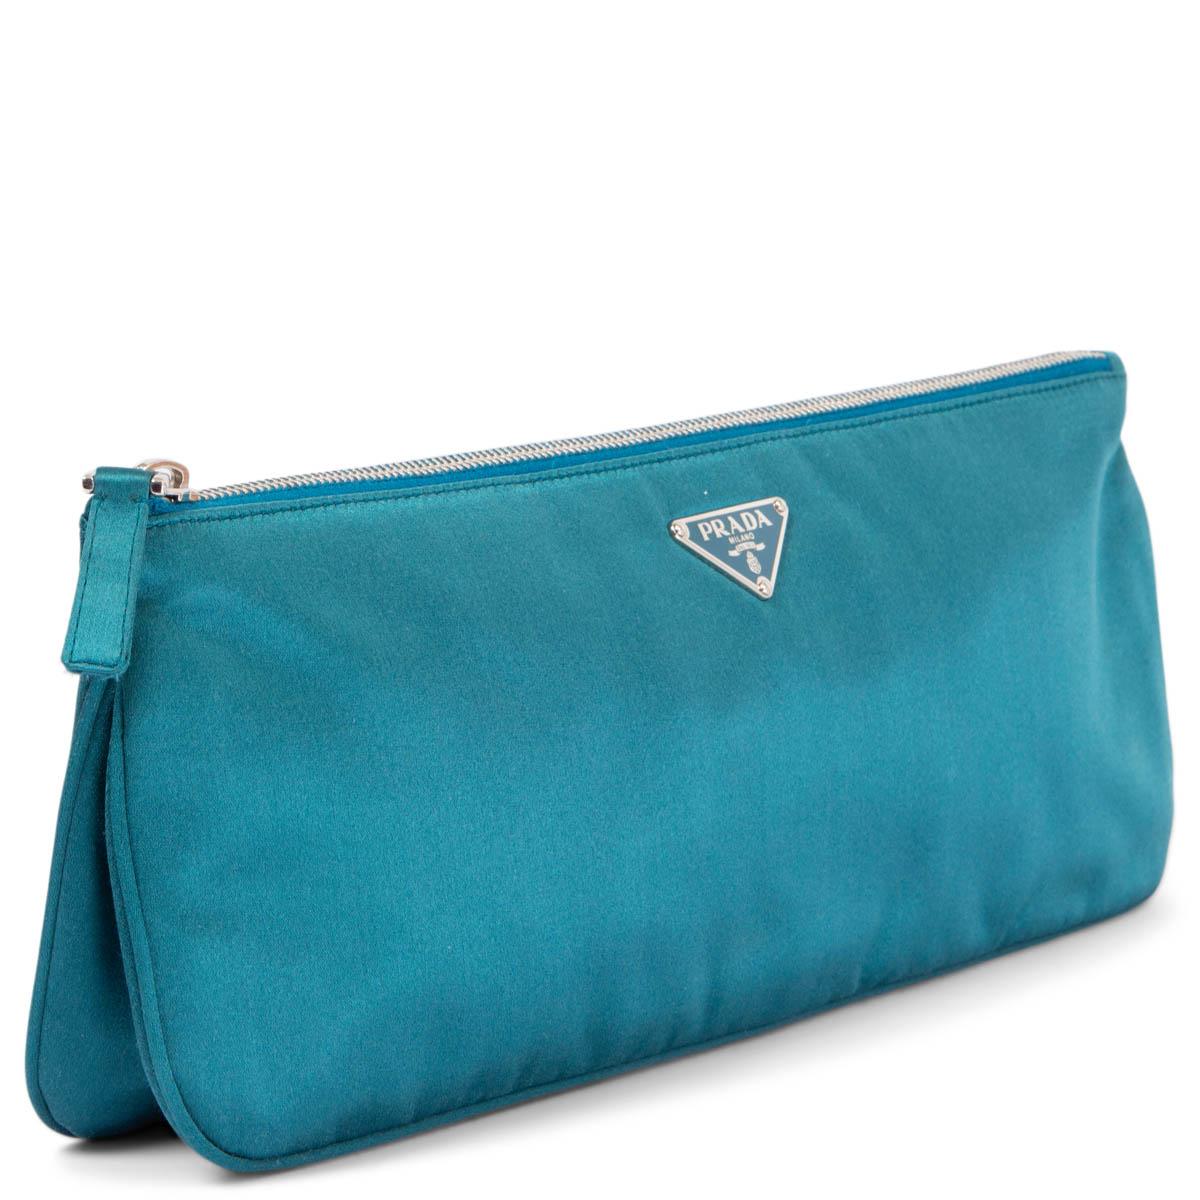 100% authentic Prada evening clutch in light petrol silk satin featuring silver-tone hardware. Opens with a zipper on top and is lined in light petrol silk with one small pocket and pocket mirror against the back. Has been carried and is in